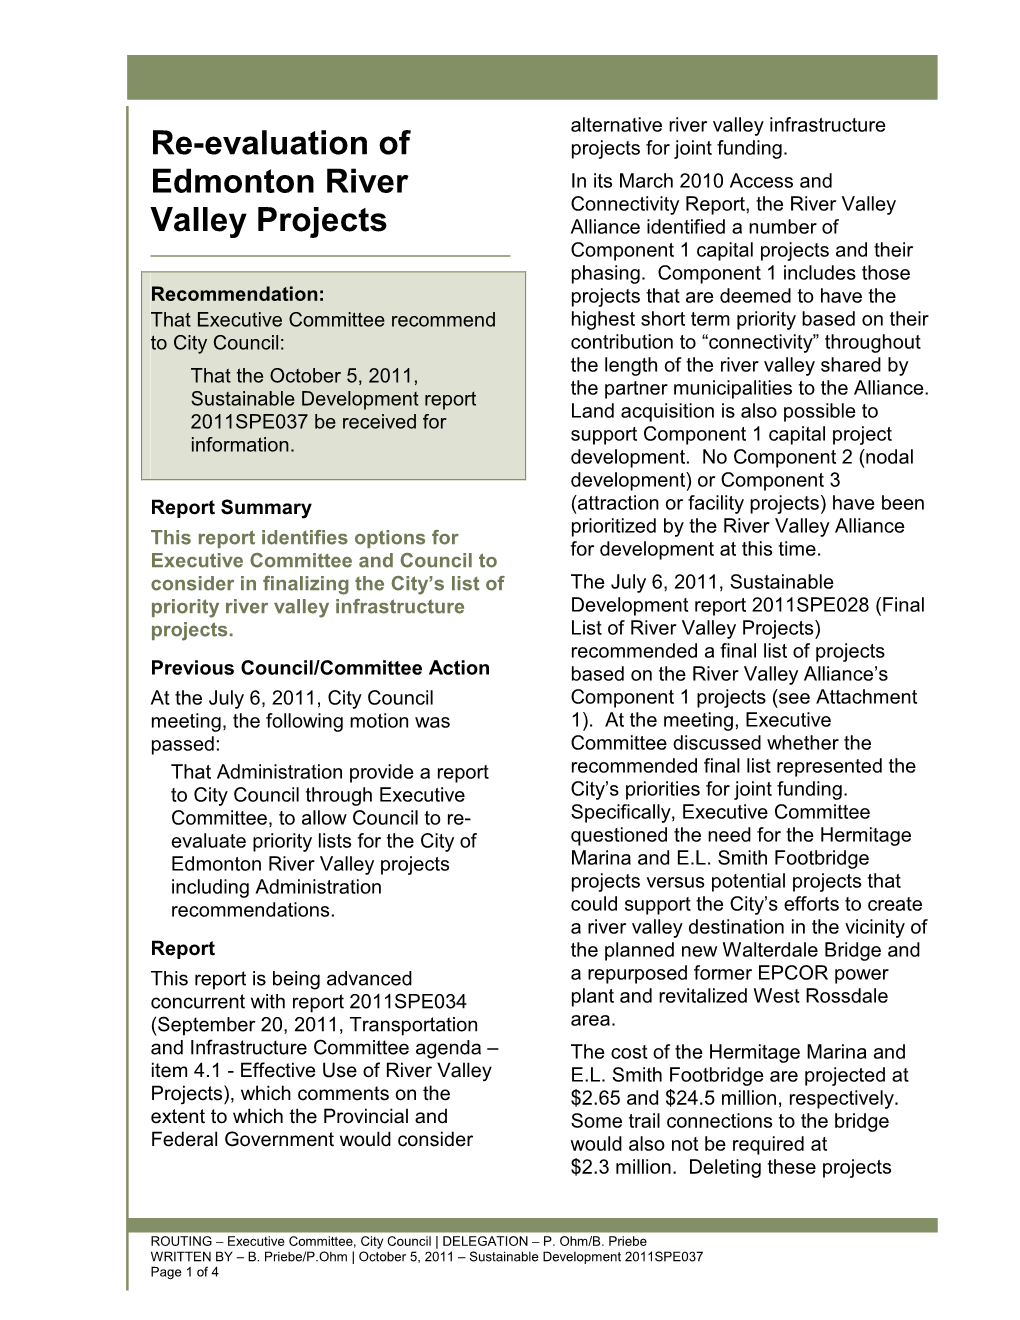 Re-Evaluation of Edmonton River Valley Projects